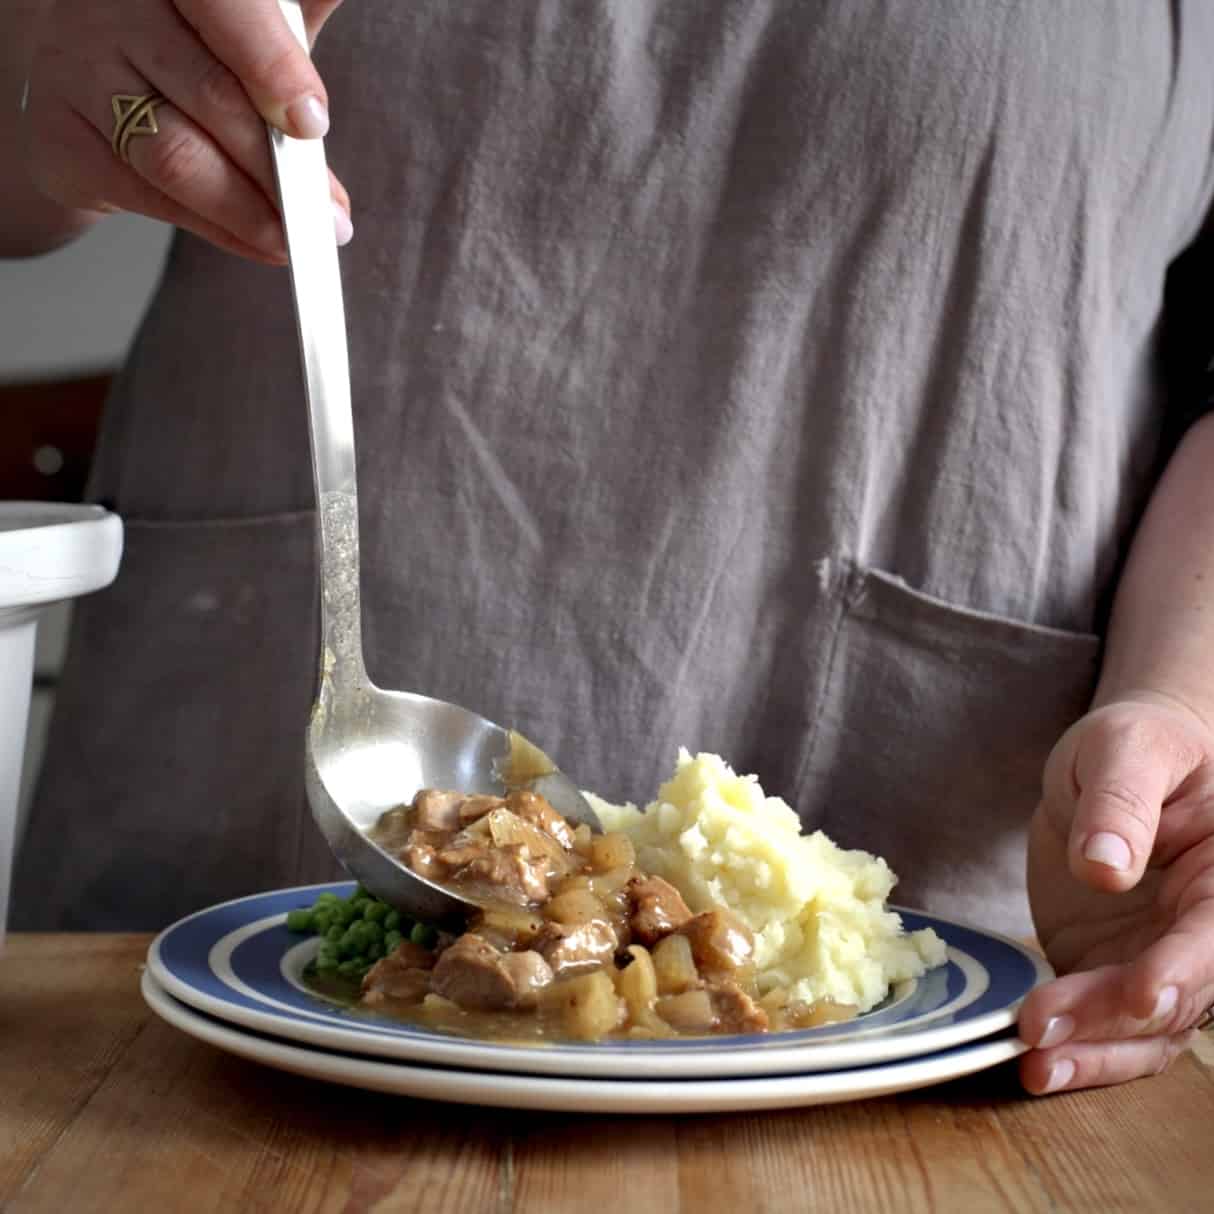 Woman’s serving up slow cooker pork in cider from s white slow cooker pot onto a blue and white plate